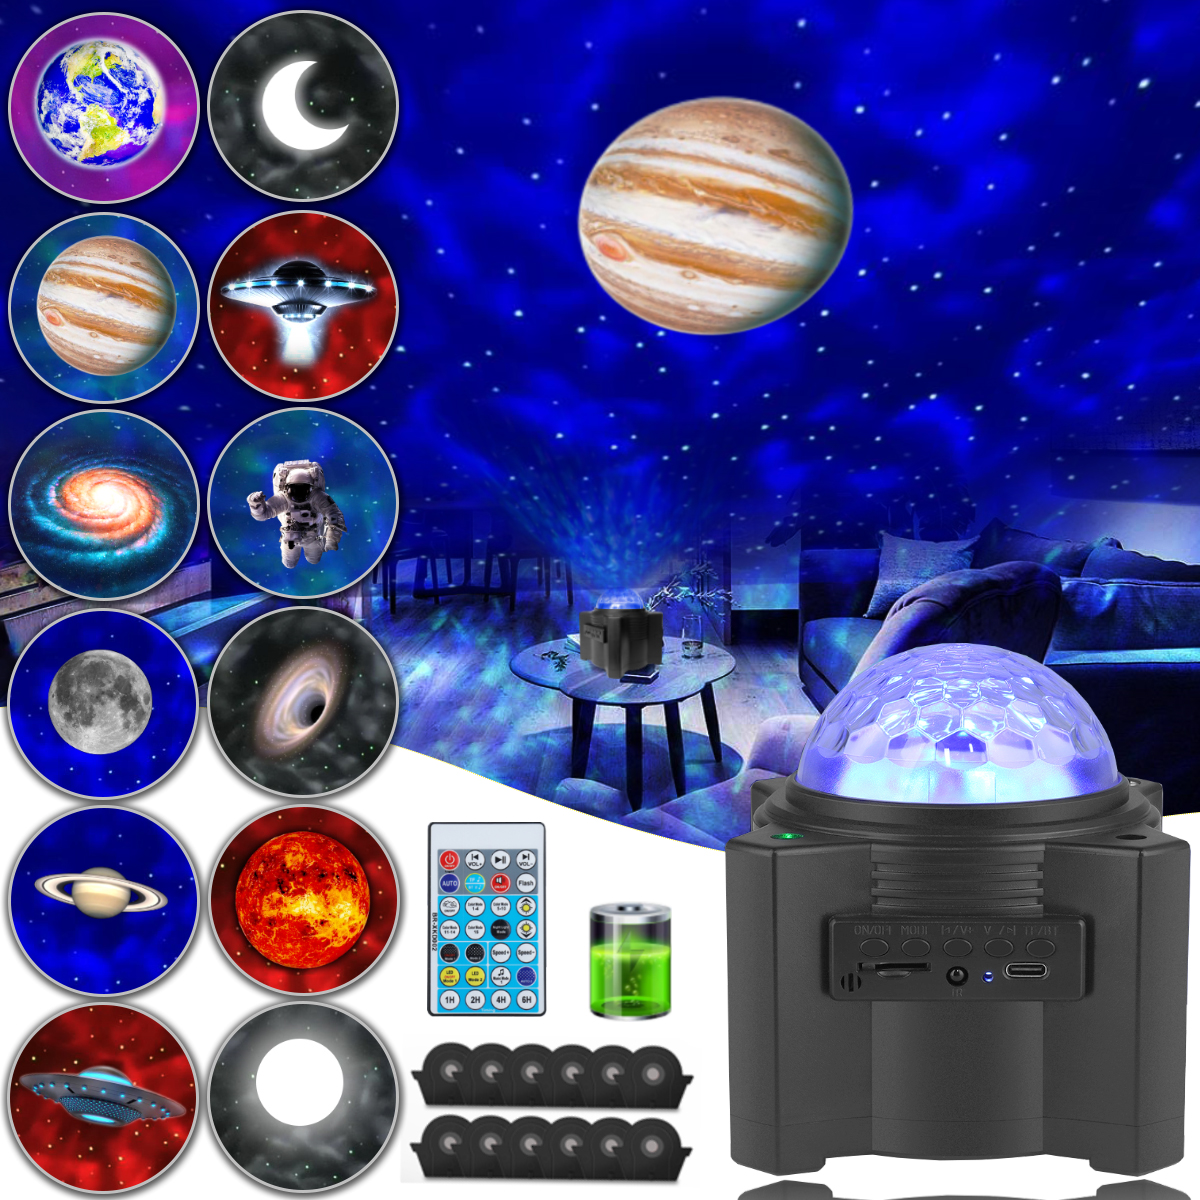 LED-Galaxy-Projector-Nebula-Night-Light-Mood-Lamp-with-Remote-with-Bluetooth-Speaker-for-Kids-and-Ad-1907929-1